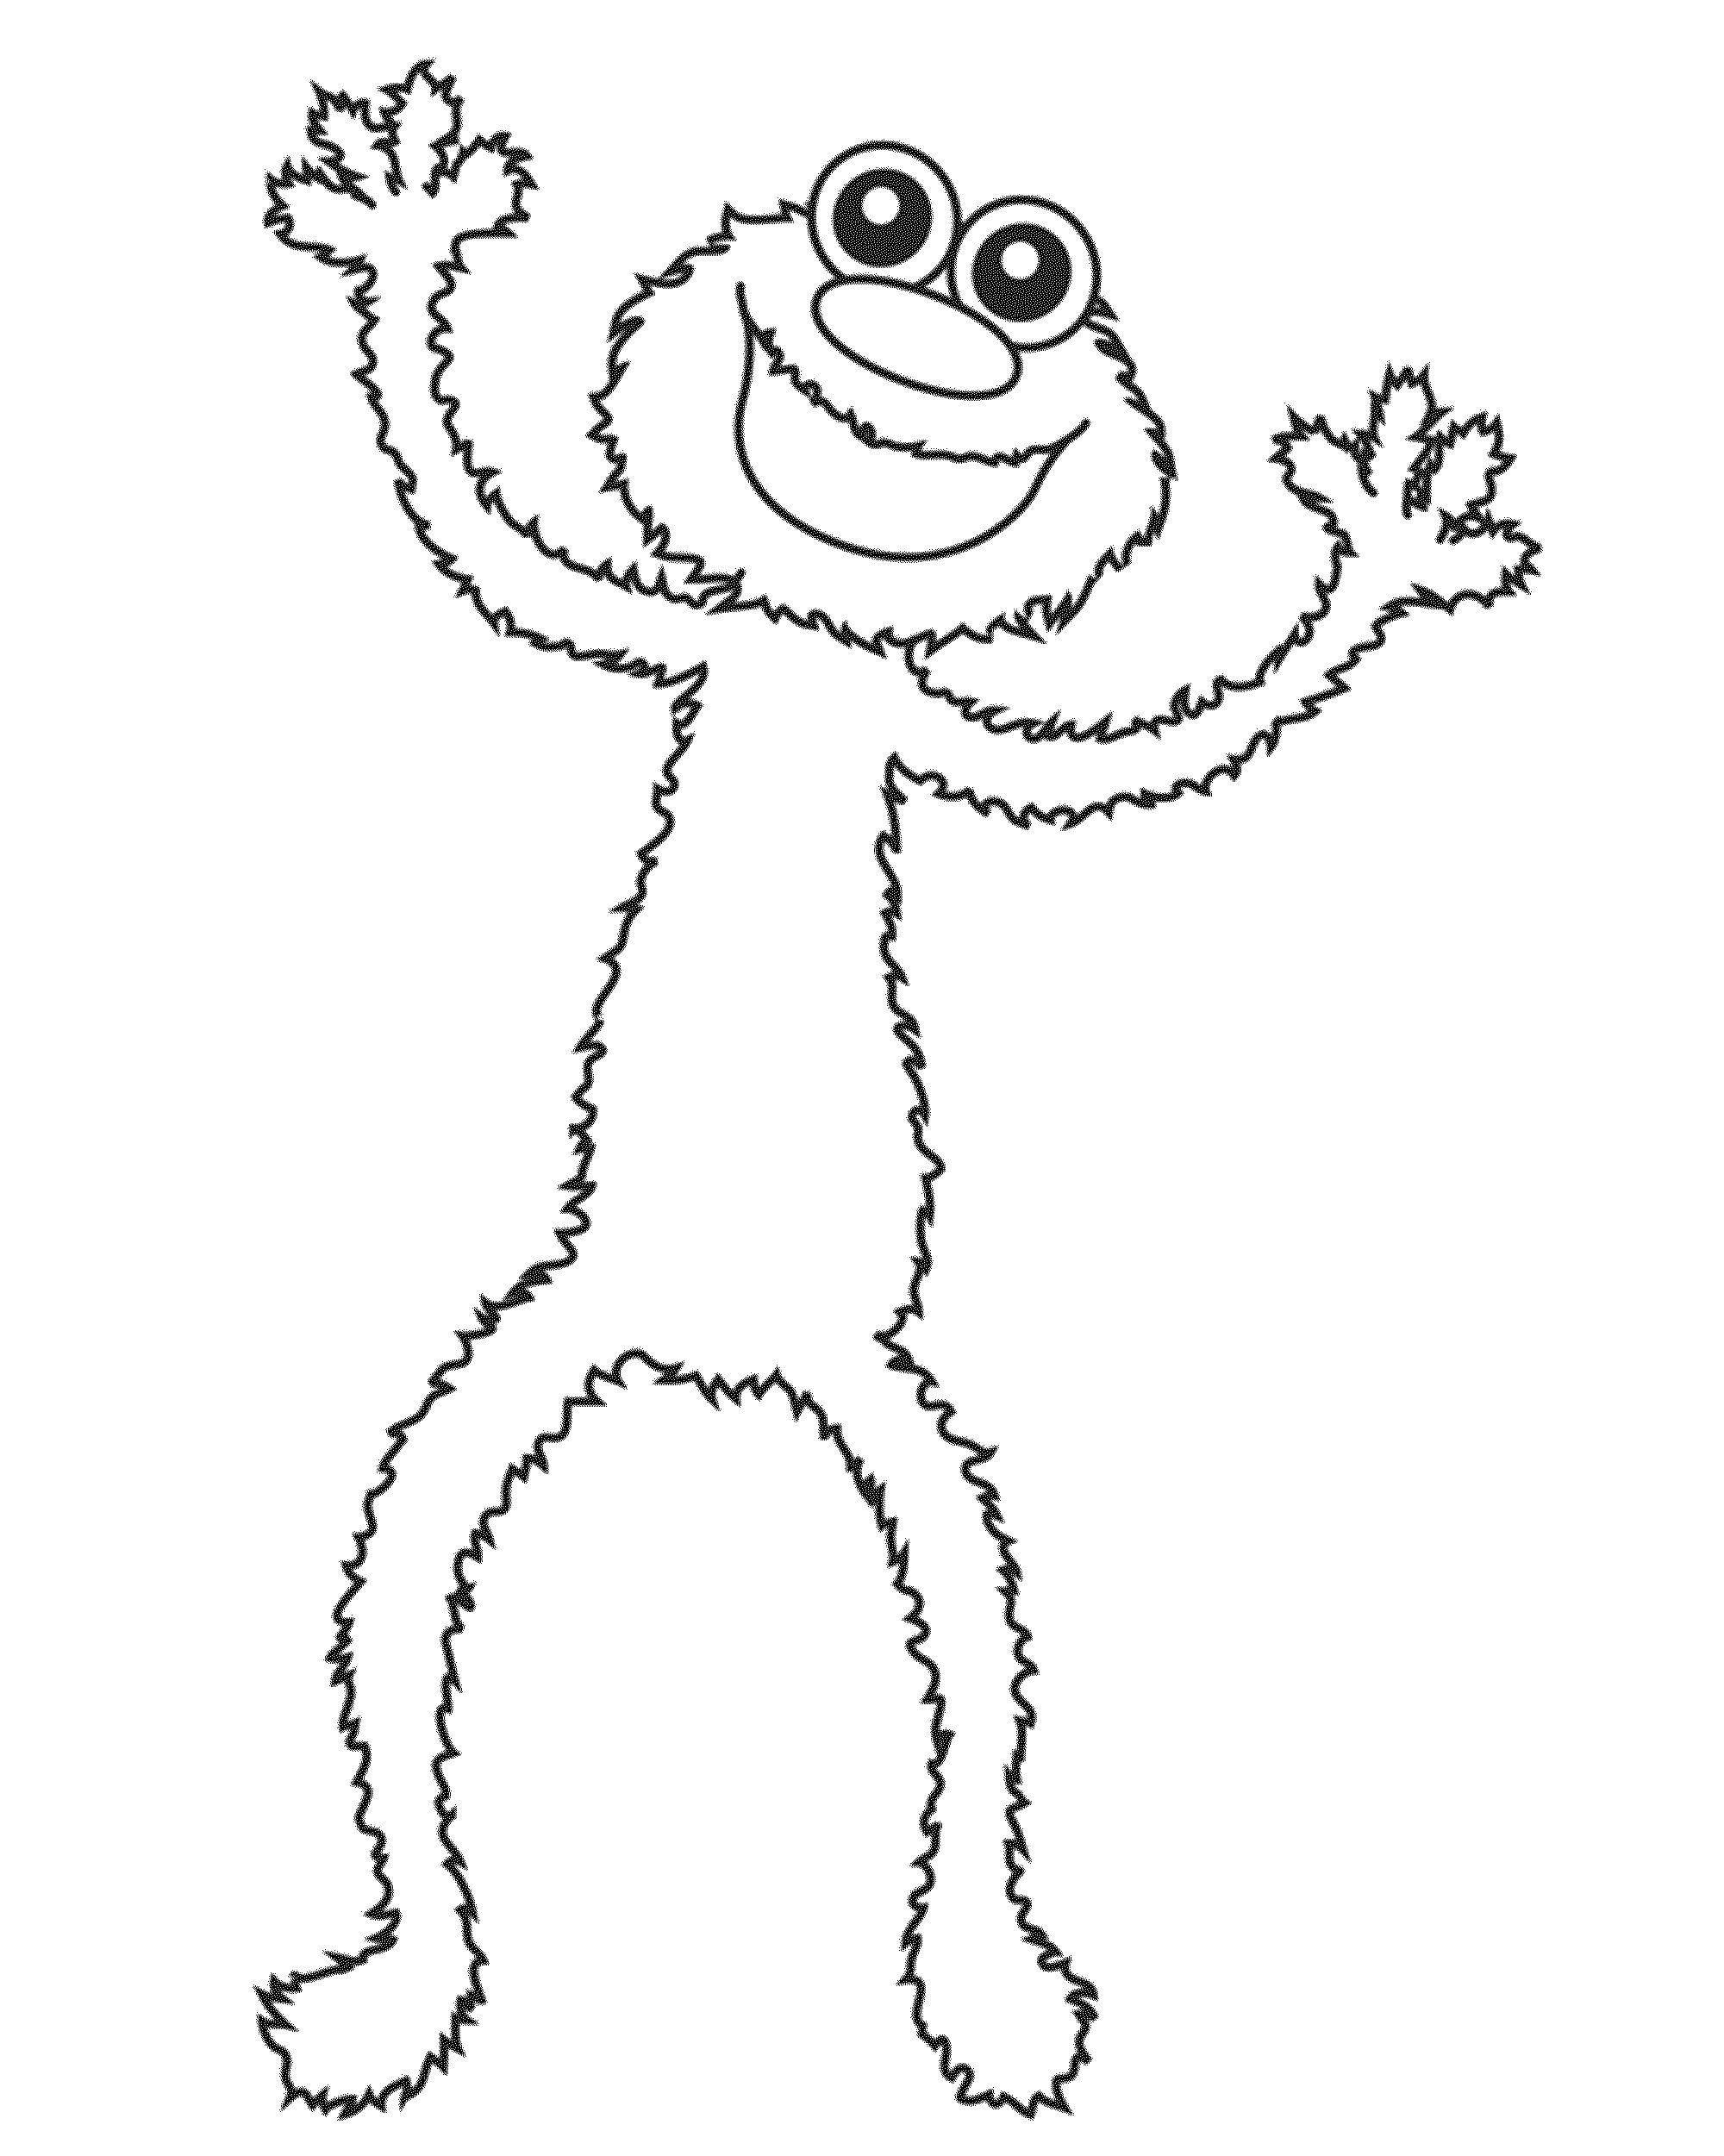 130 Elmo Coloring Page Ideas: Fun with the Furry Red Monster 129